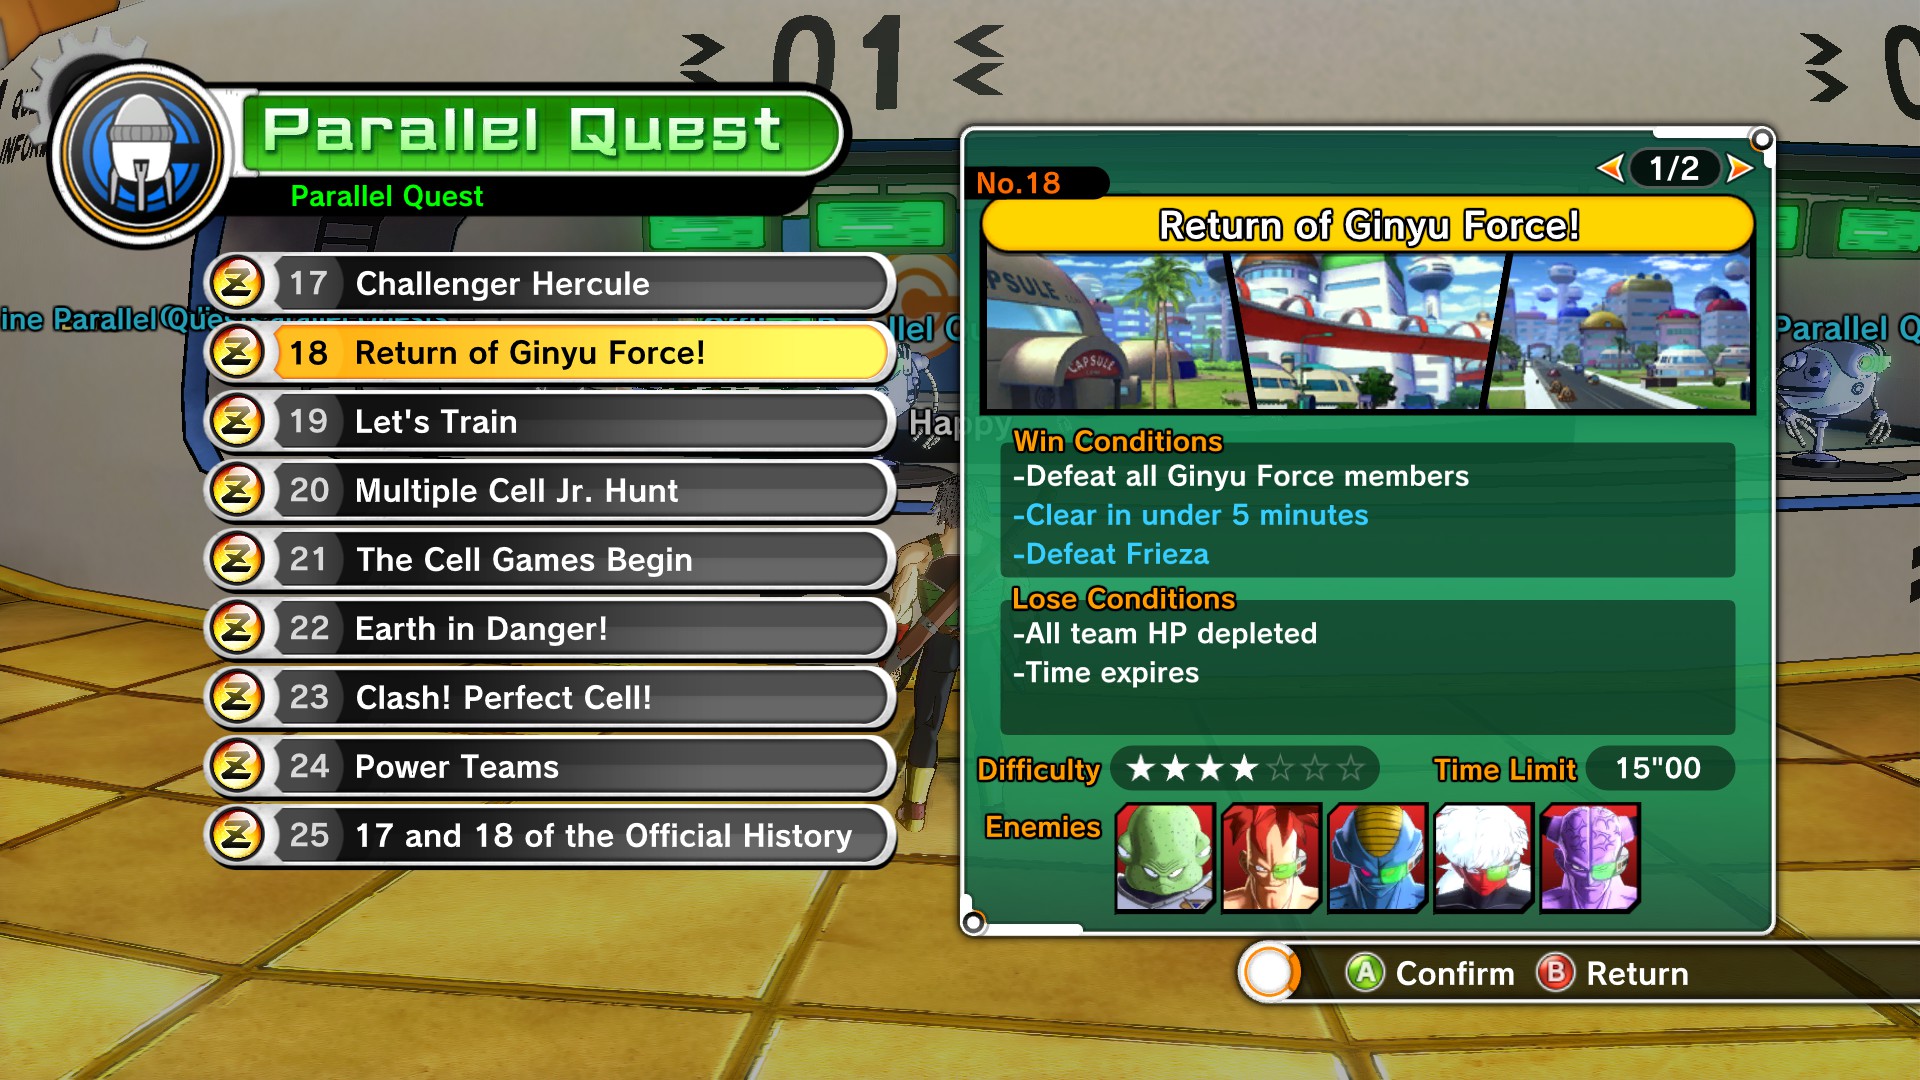 How to Unlock All Parallel Quests in Dragon Ball Xenoverse 2! 